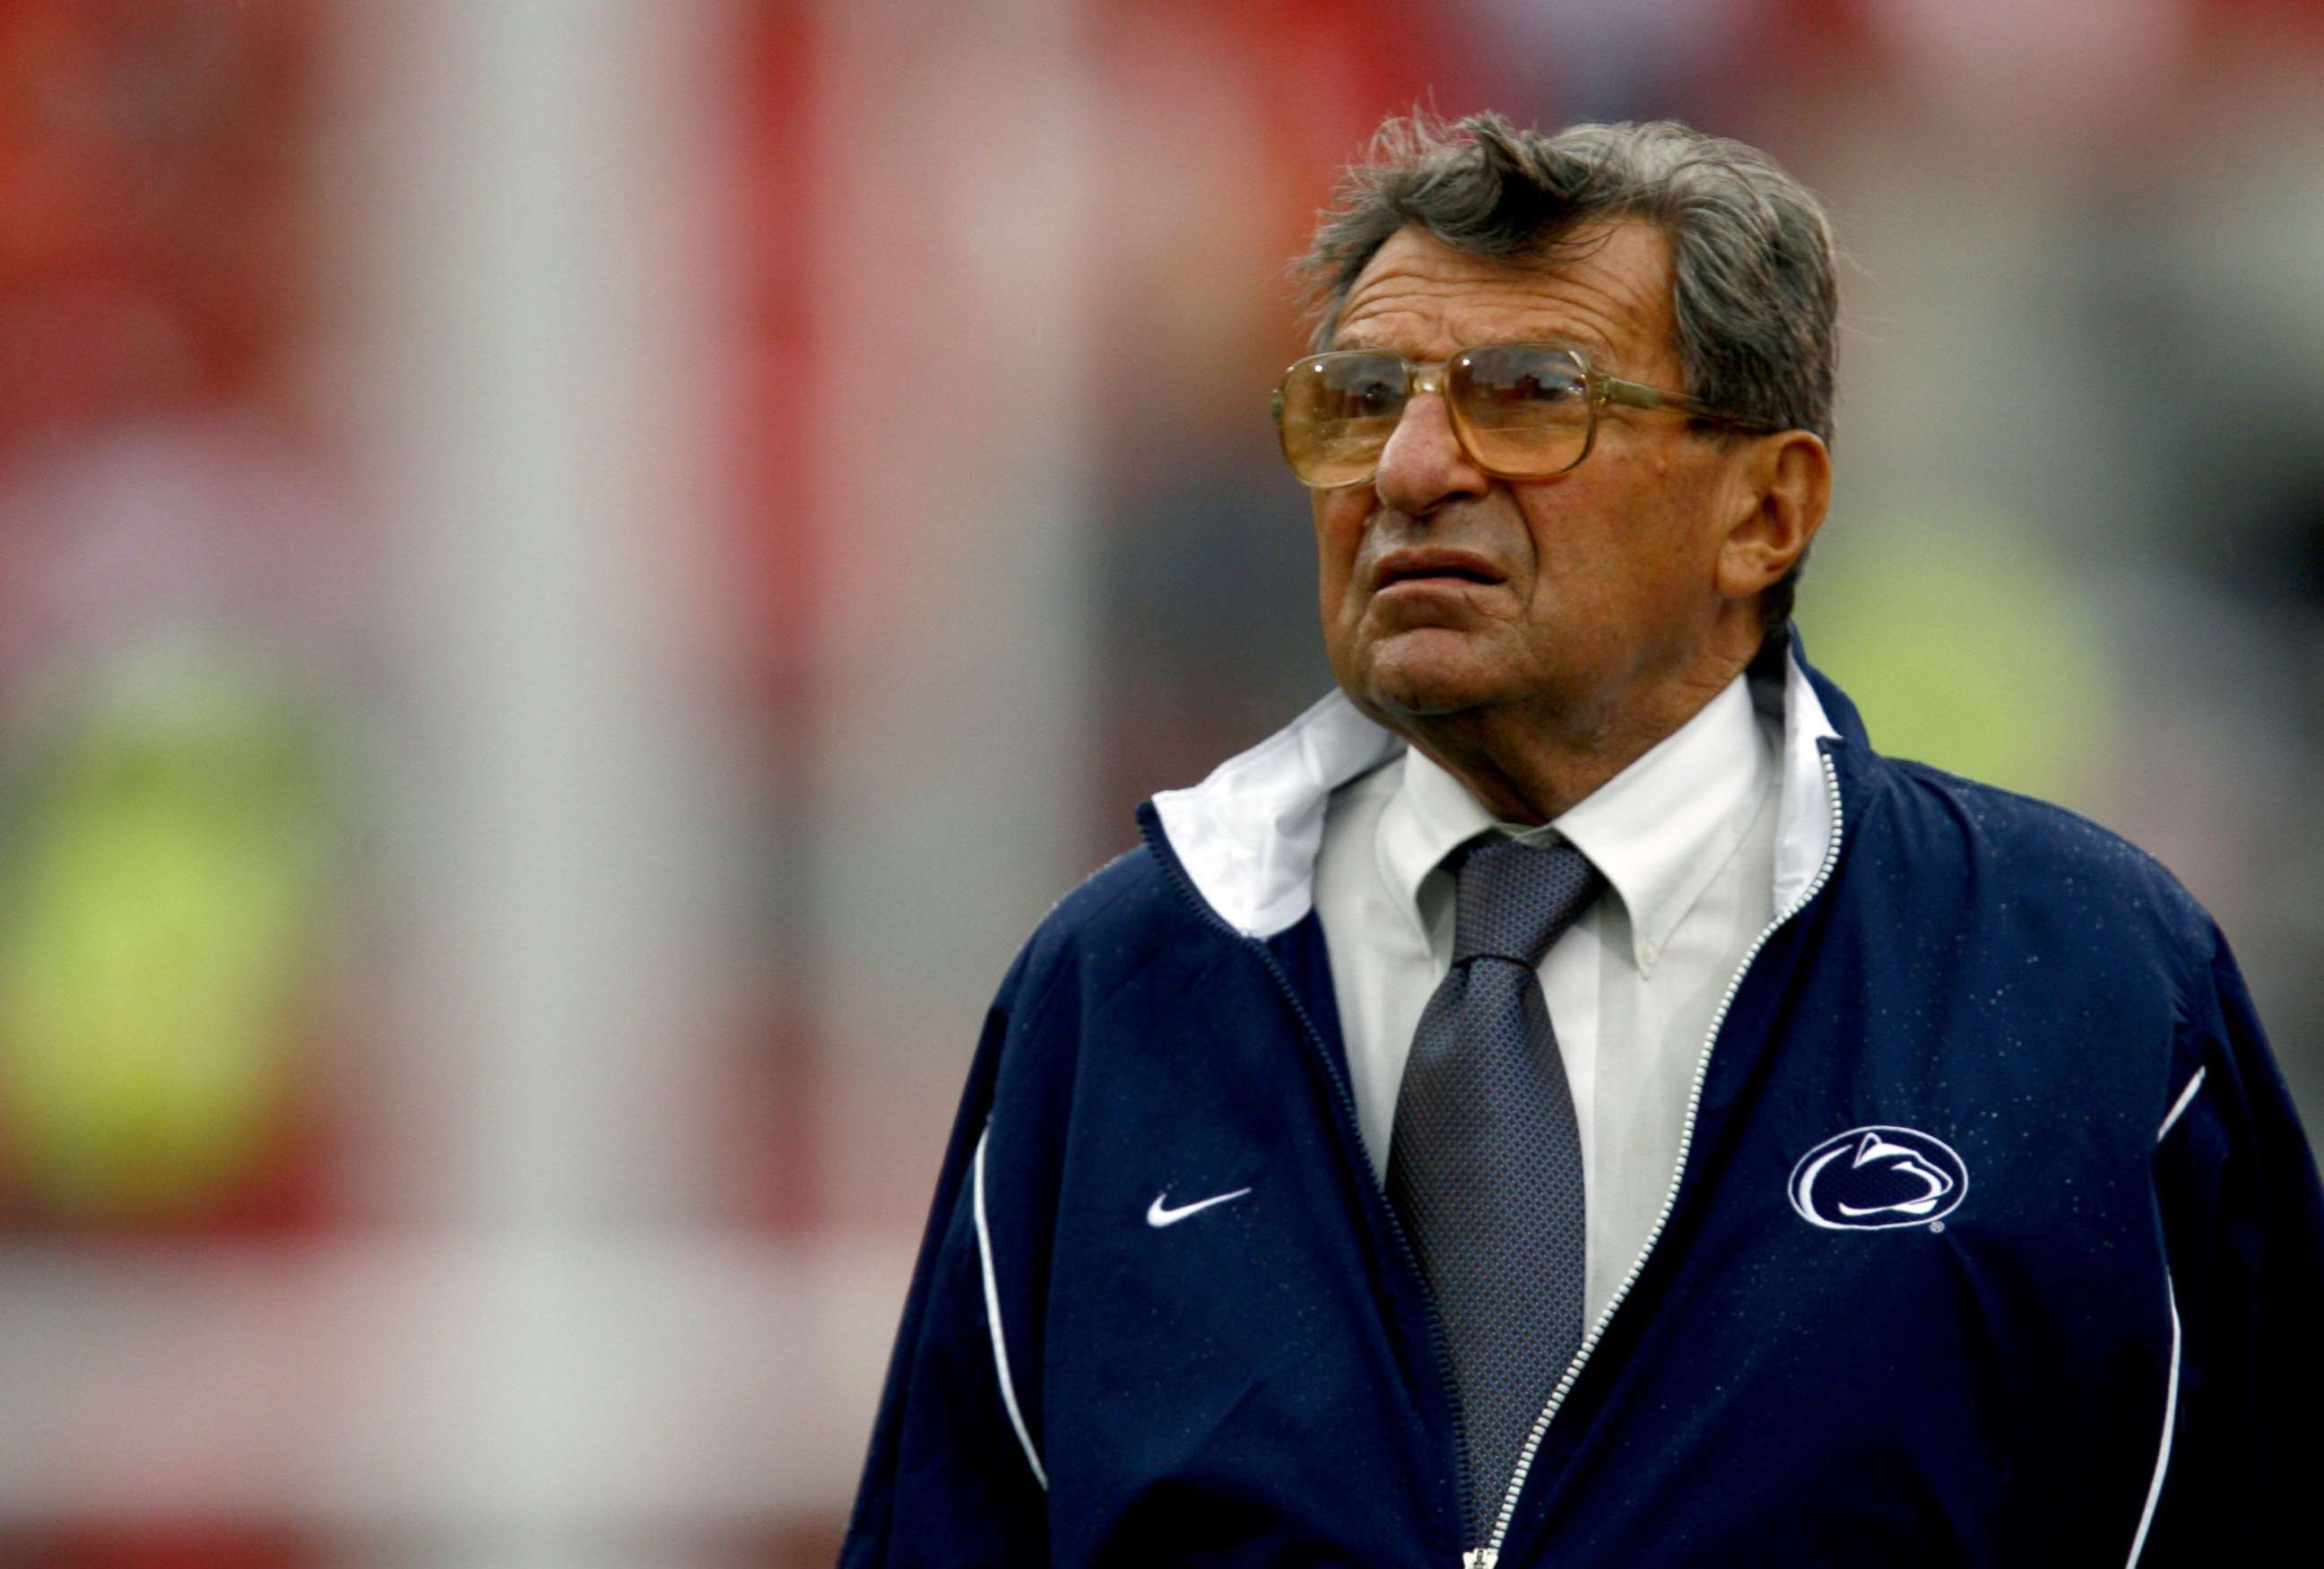 PHOTO: Joe Paterno head coach of the Penn State Nittany Lions looks on against the Ohio State Buckeyes, Sept. 23, 2006, in Columbus, Ohio.